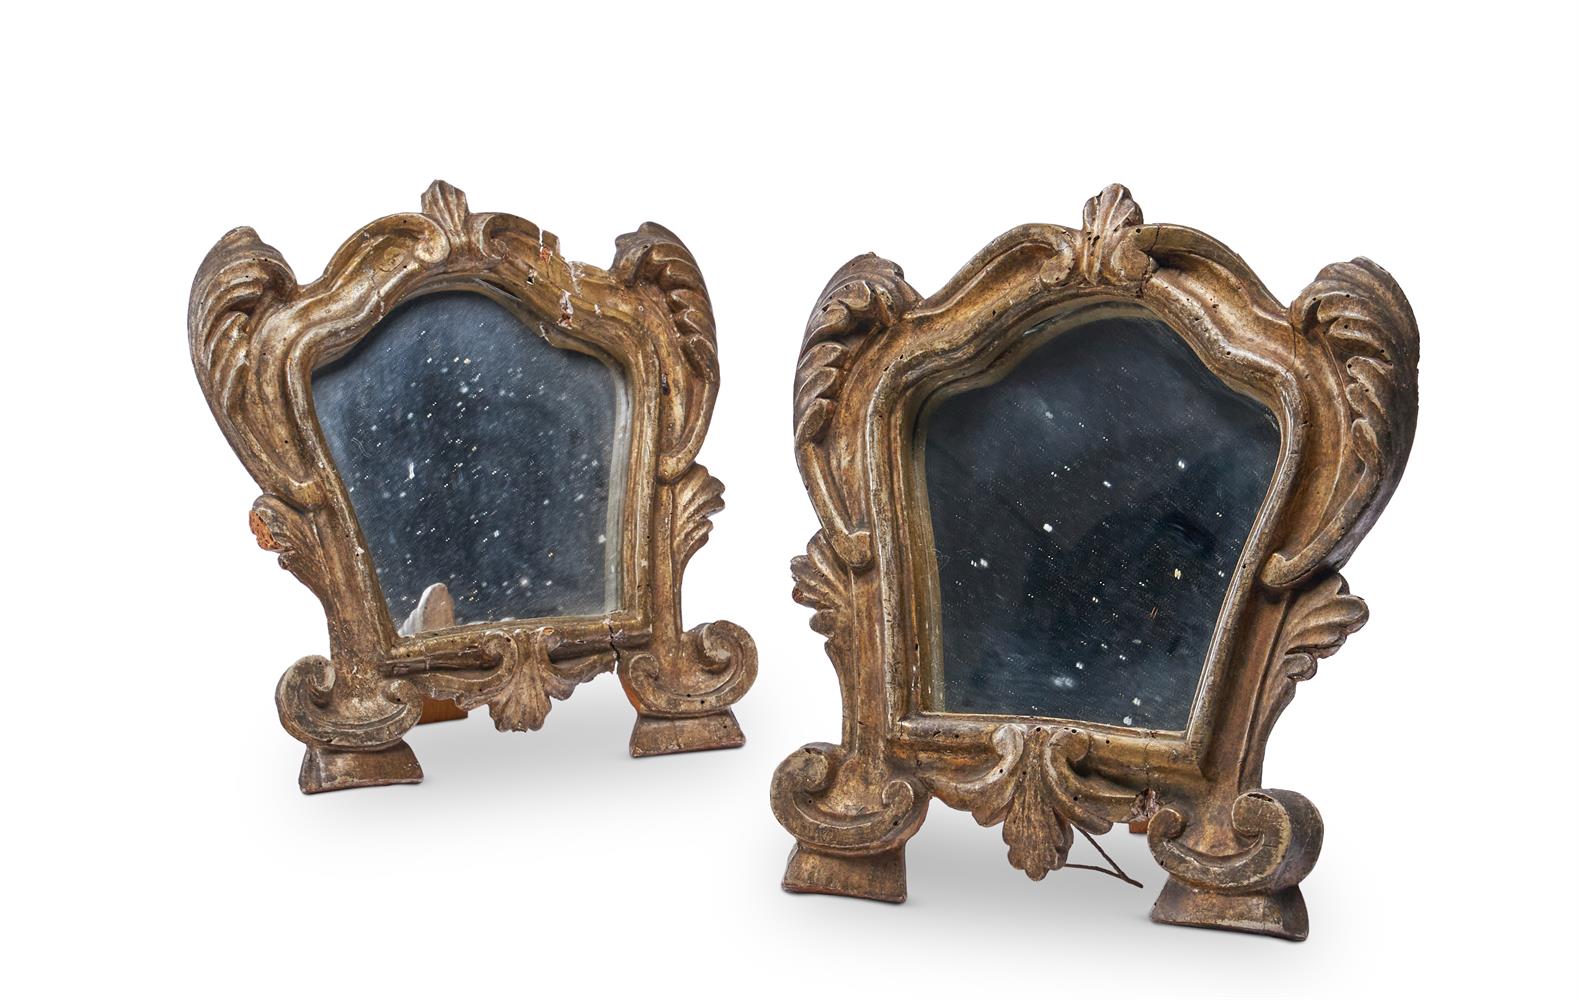 A PAIR OF ITALIAN GILTWOOD MIRRORS, EARLY 19TH CENTURY AND LATER